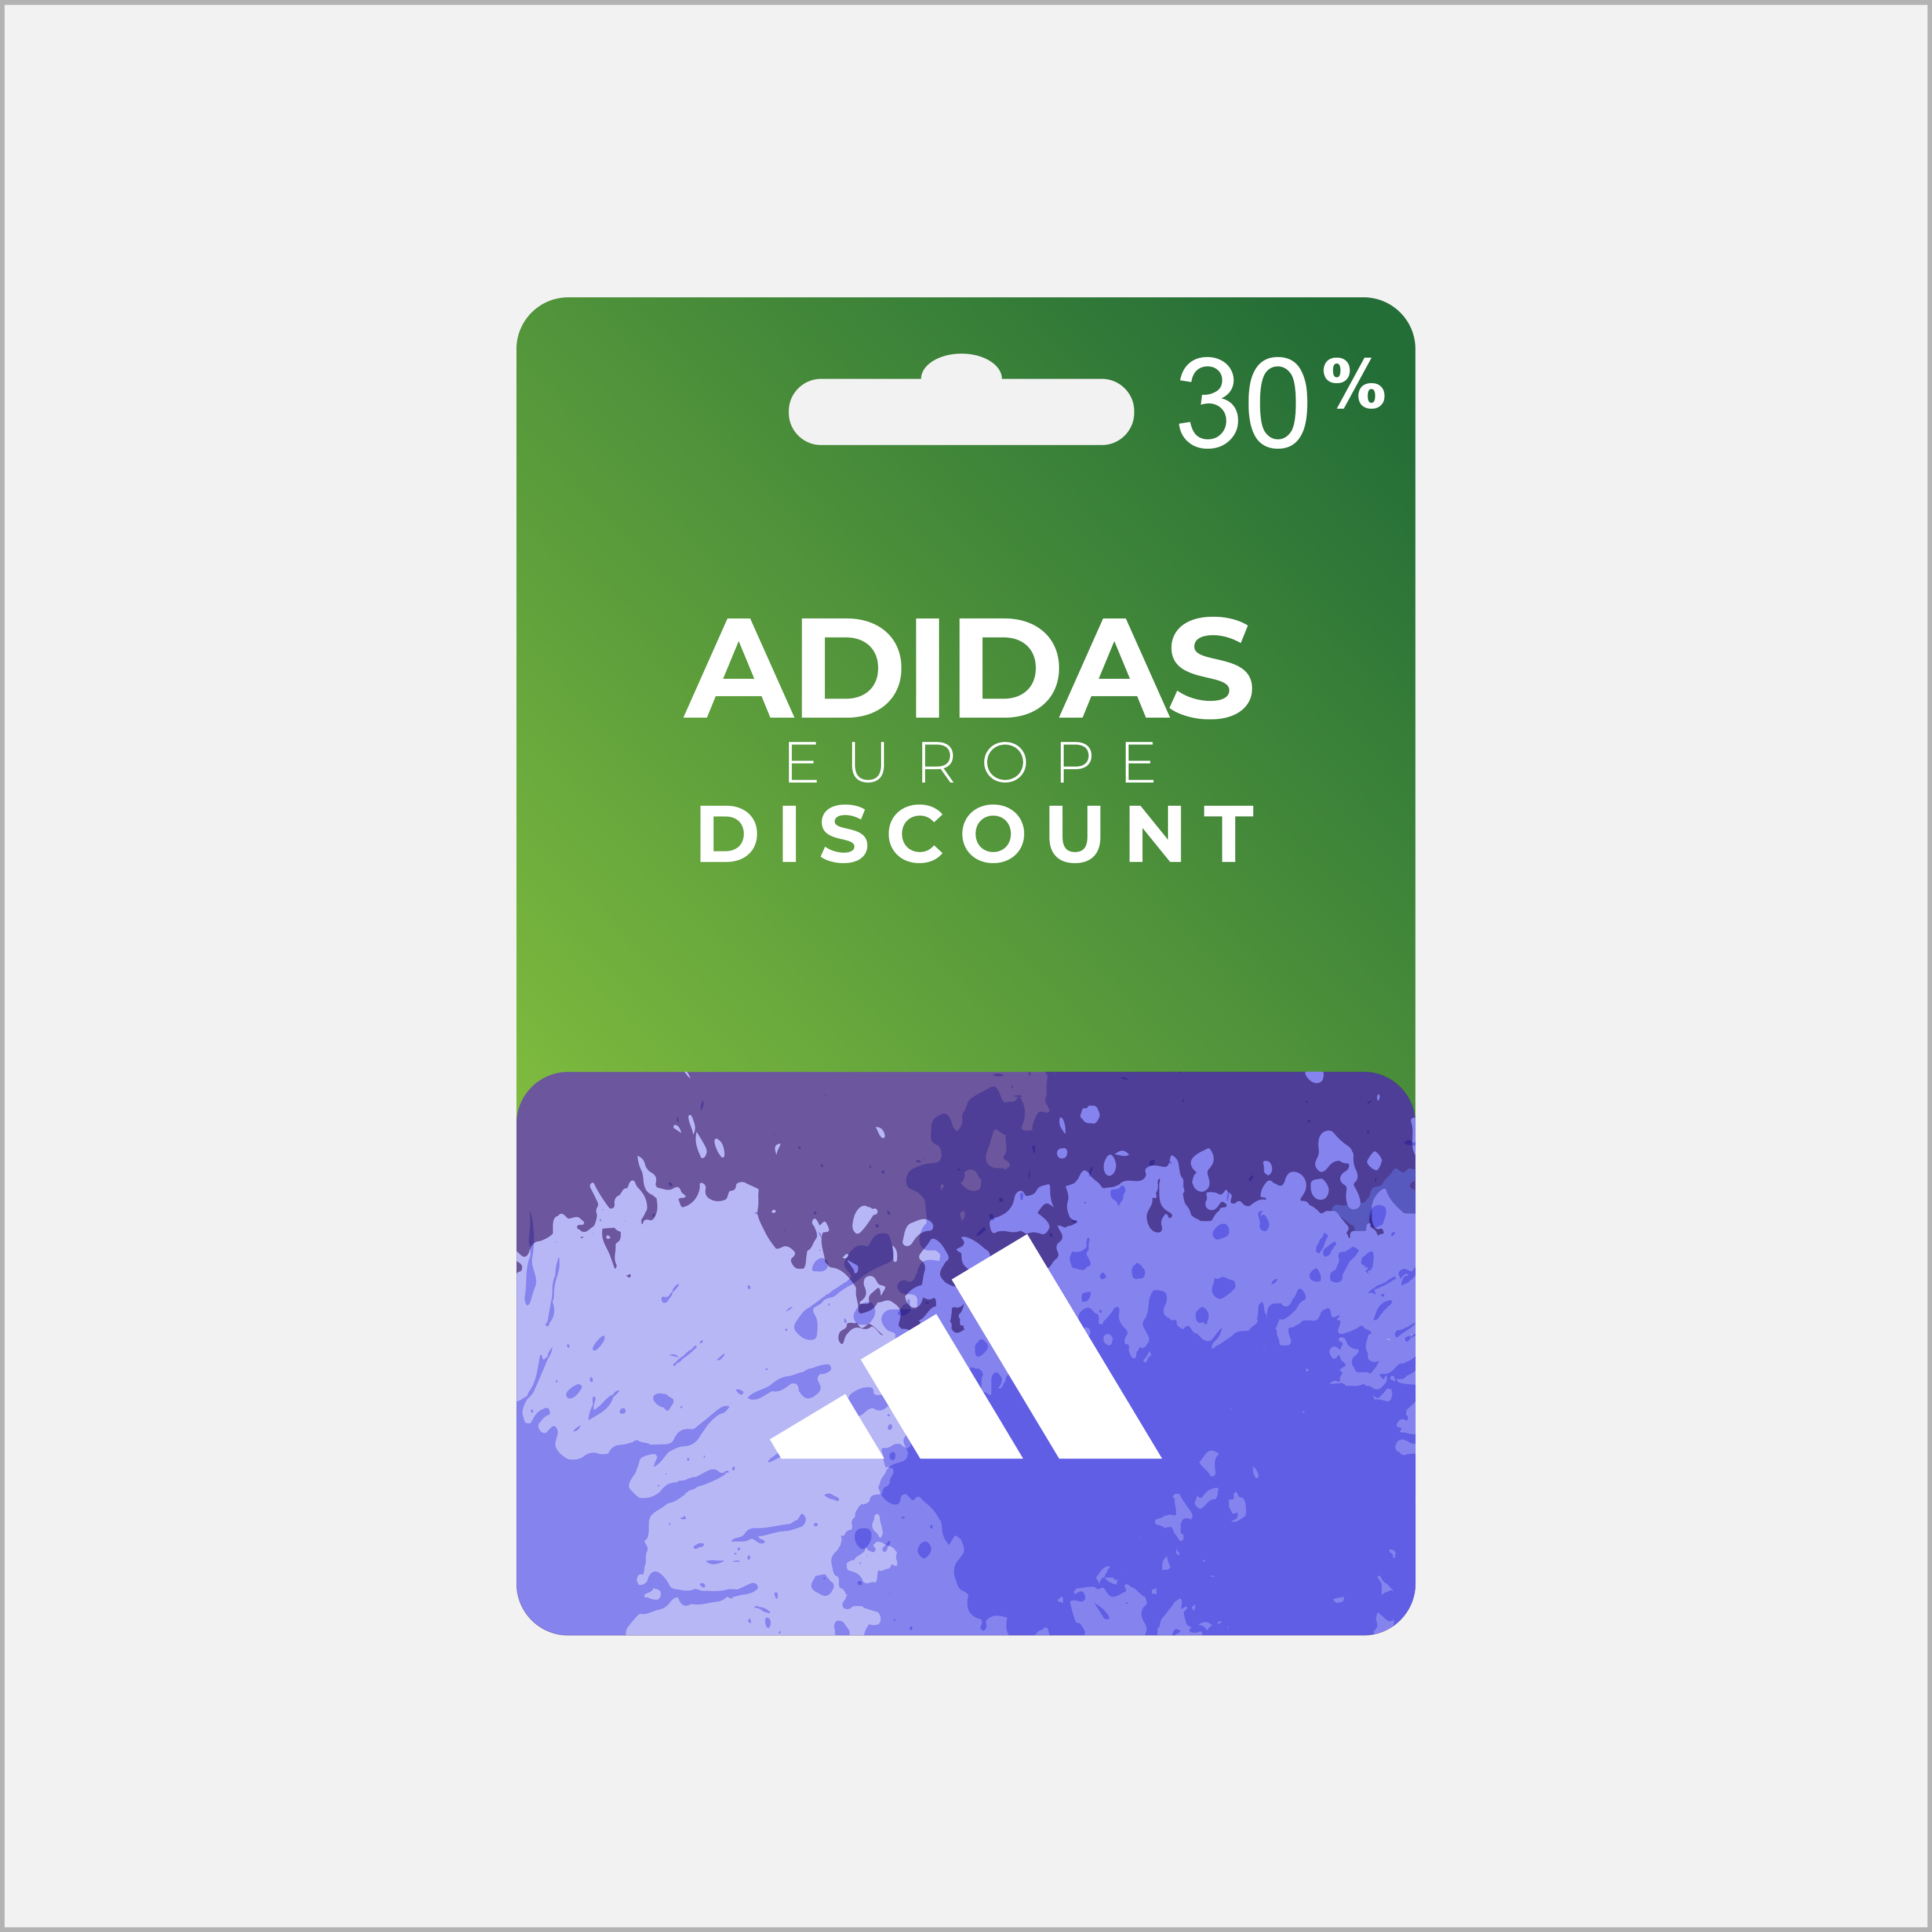 adidas Discount Code 30% for Europe 